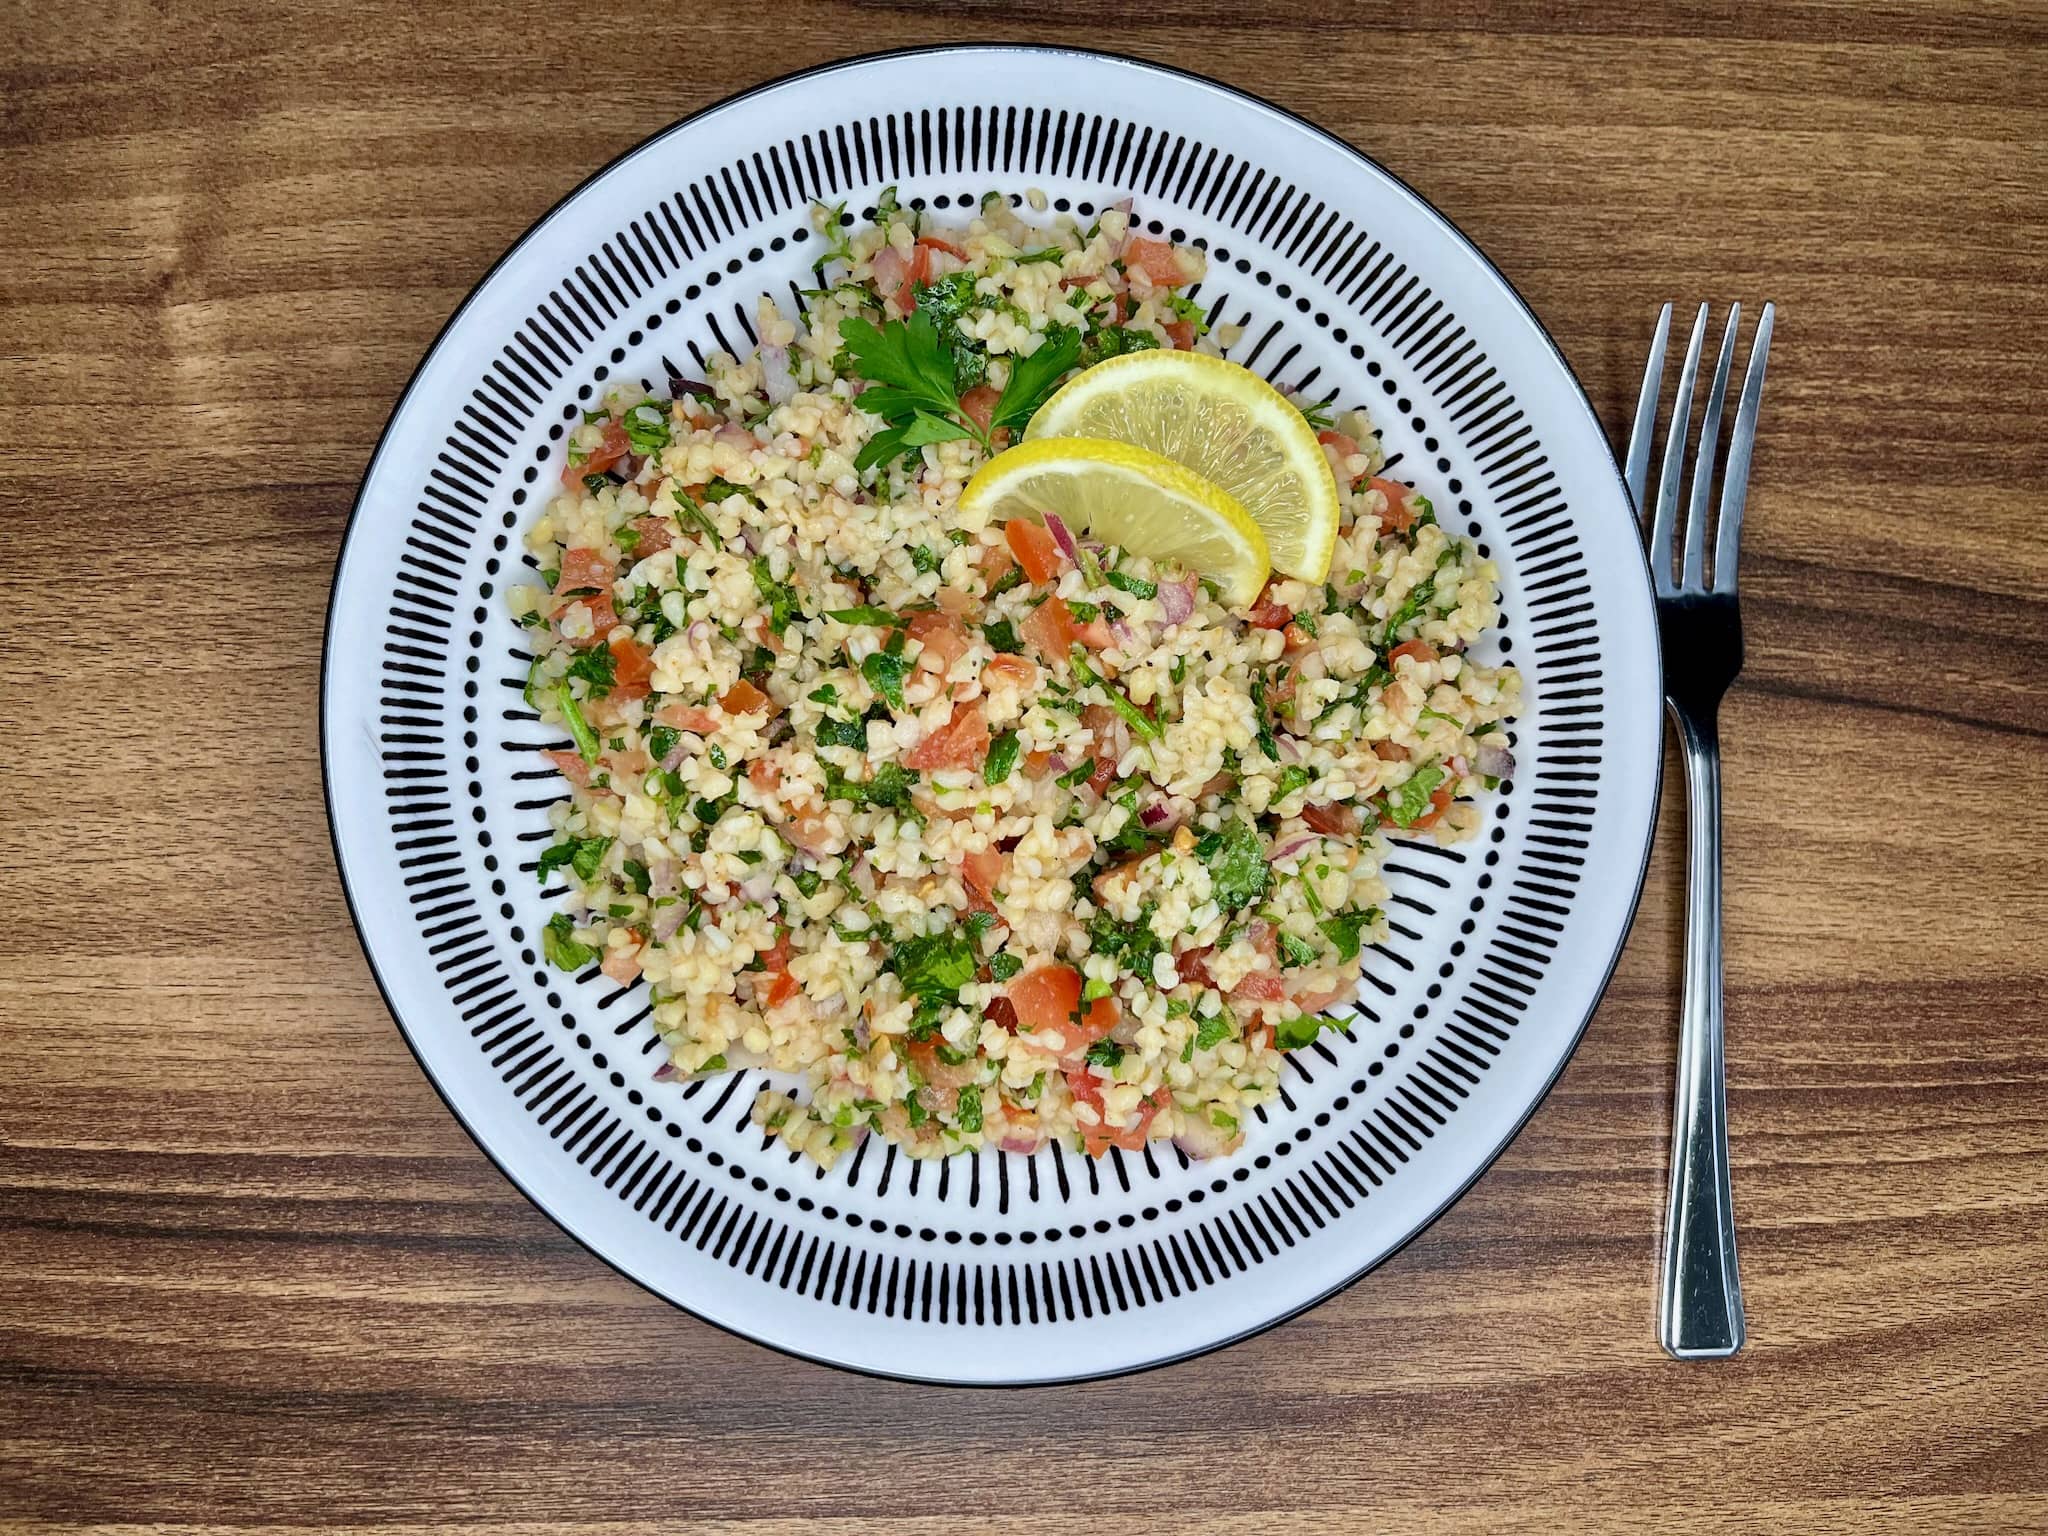 Tabbouleh on a plate decorated with two slices of lemon